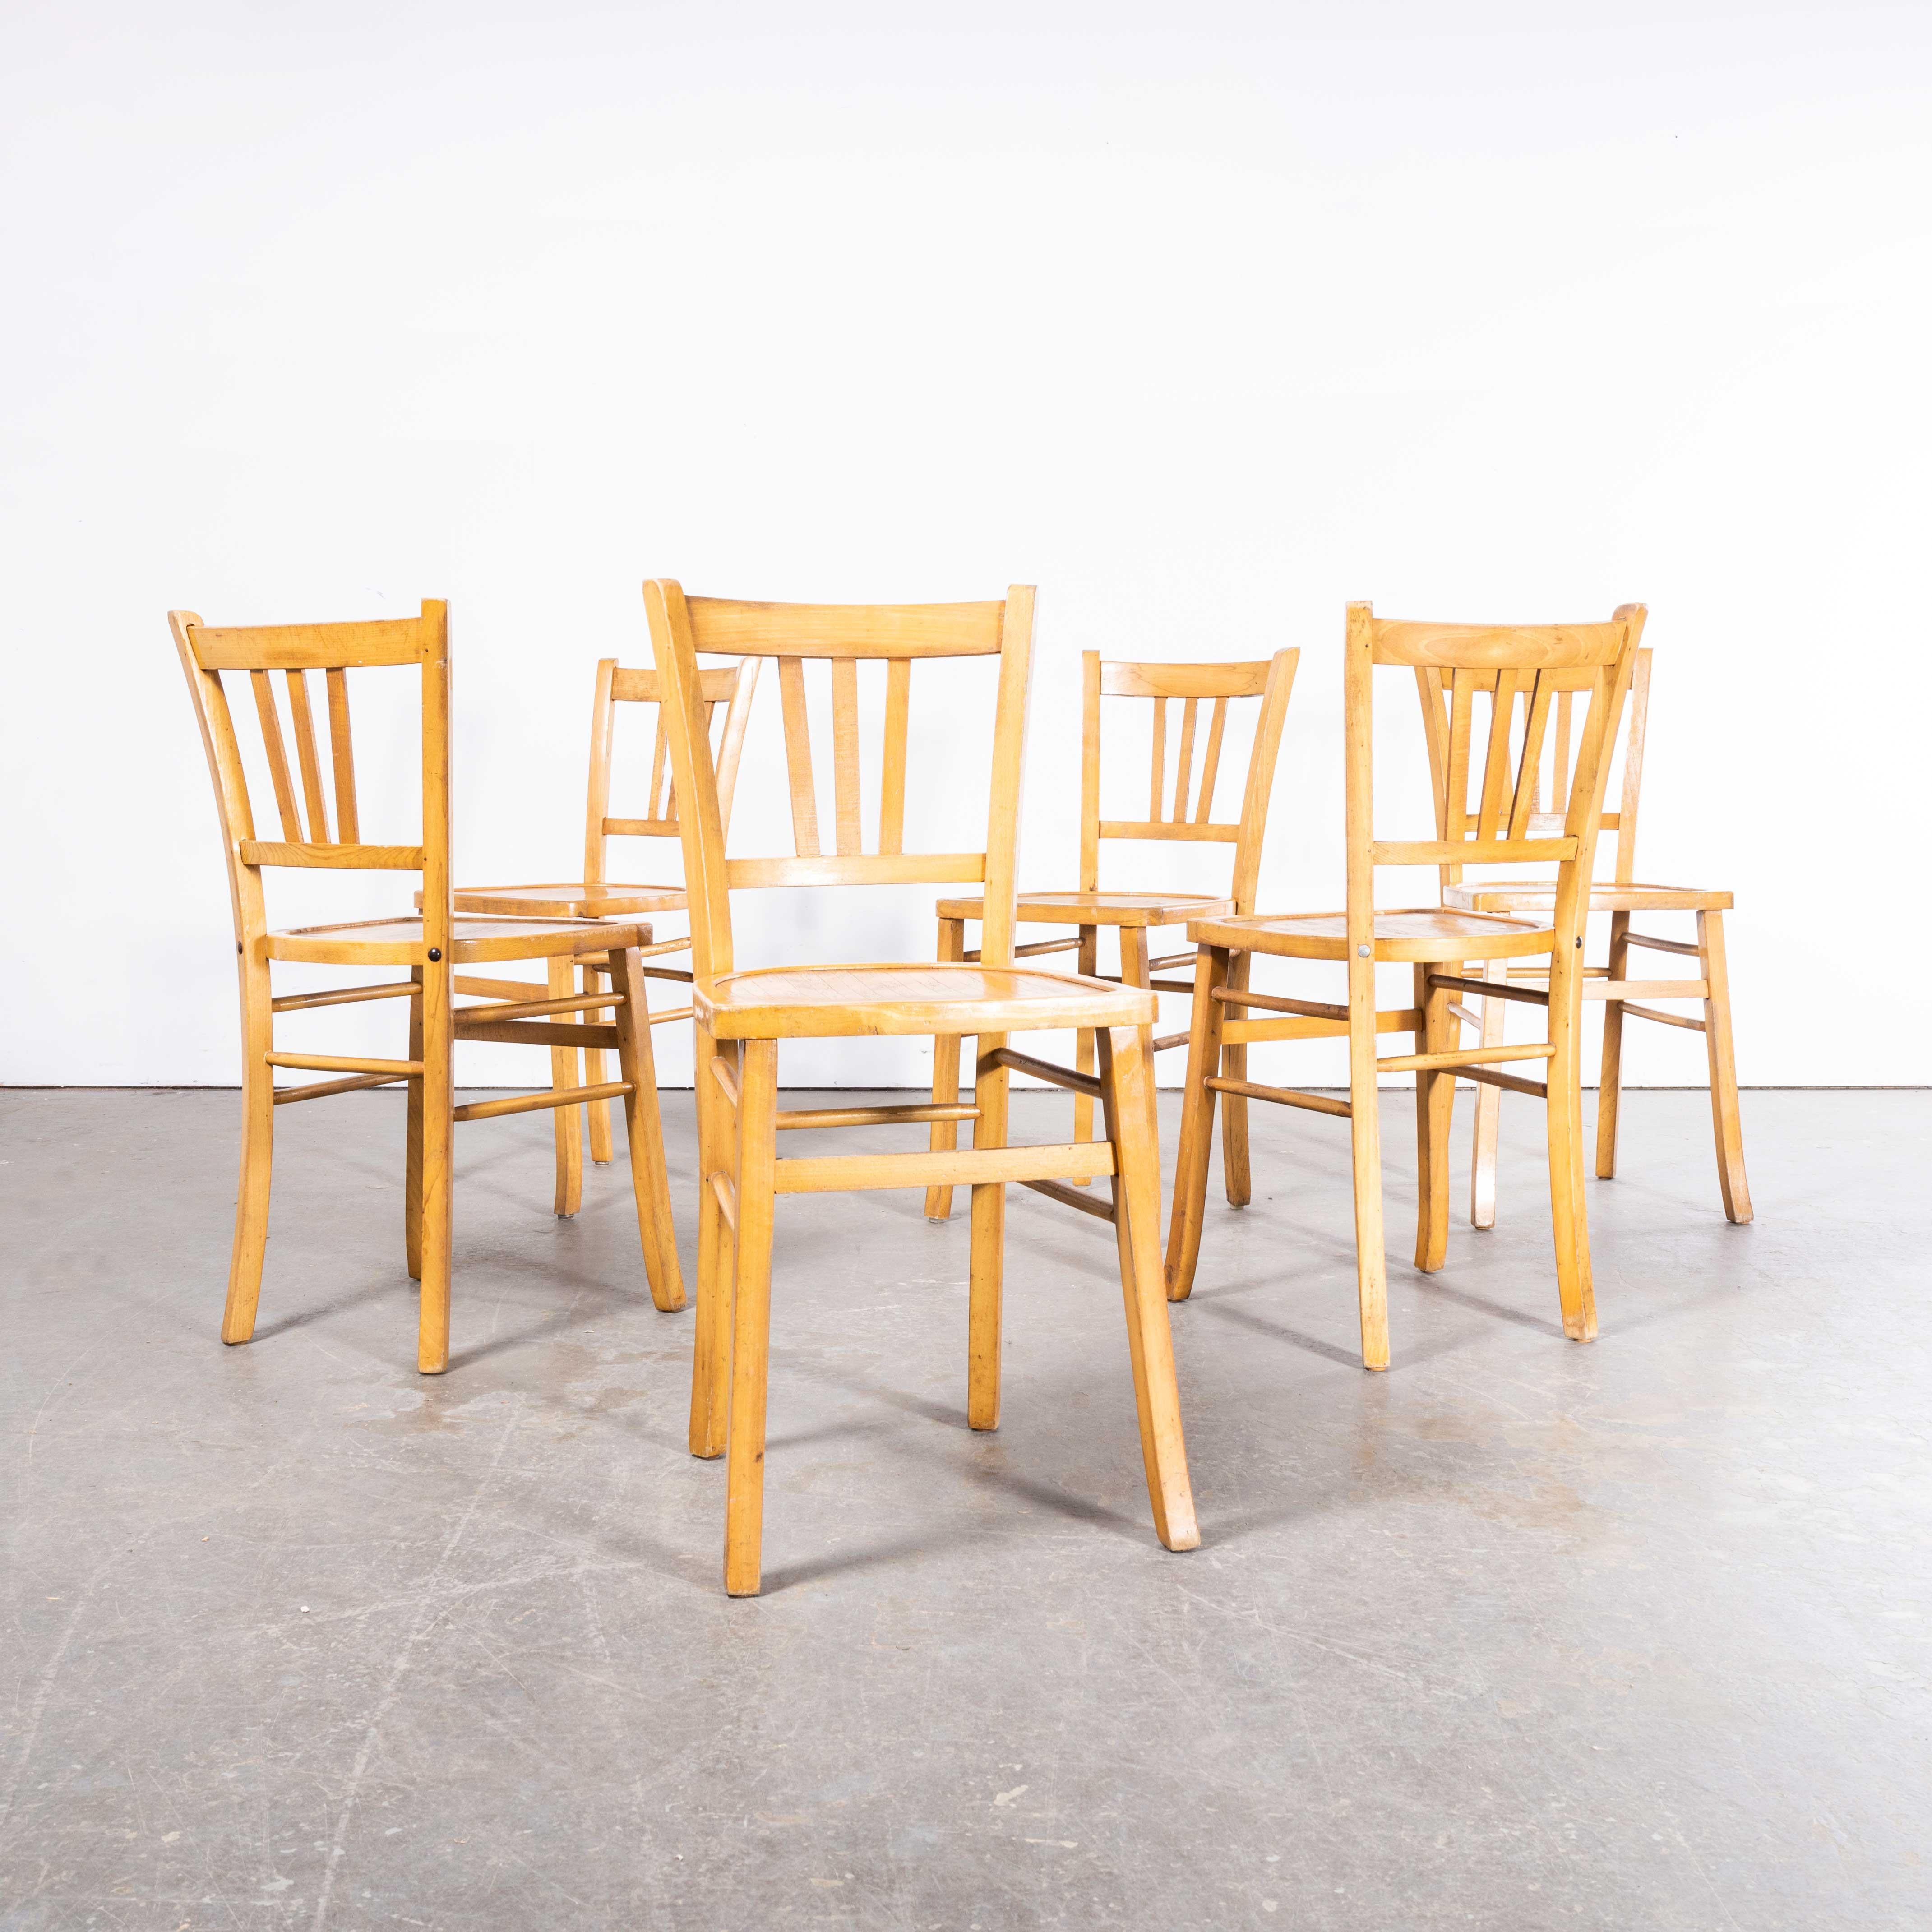 1950’s Luterma French Farmhouse Dining Chair – Set Of Six
1950’s Luterma French Farmhouse Dining Chair – Set Of Six. The process of steam bending beech to create elegant chairs was discovered and developed by Thonet, but when its patents expired in